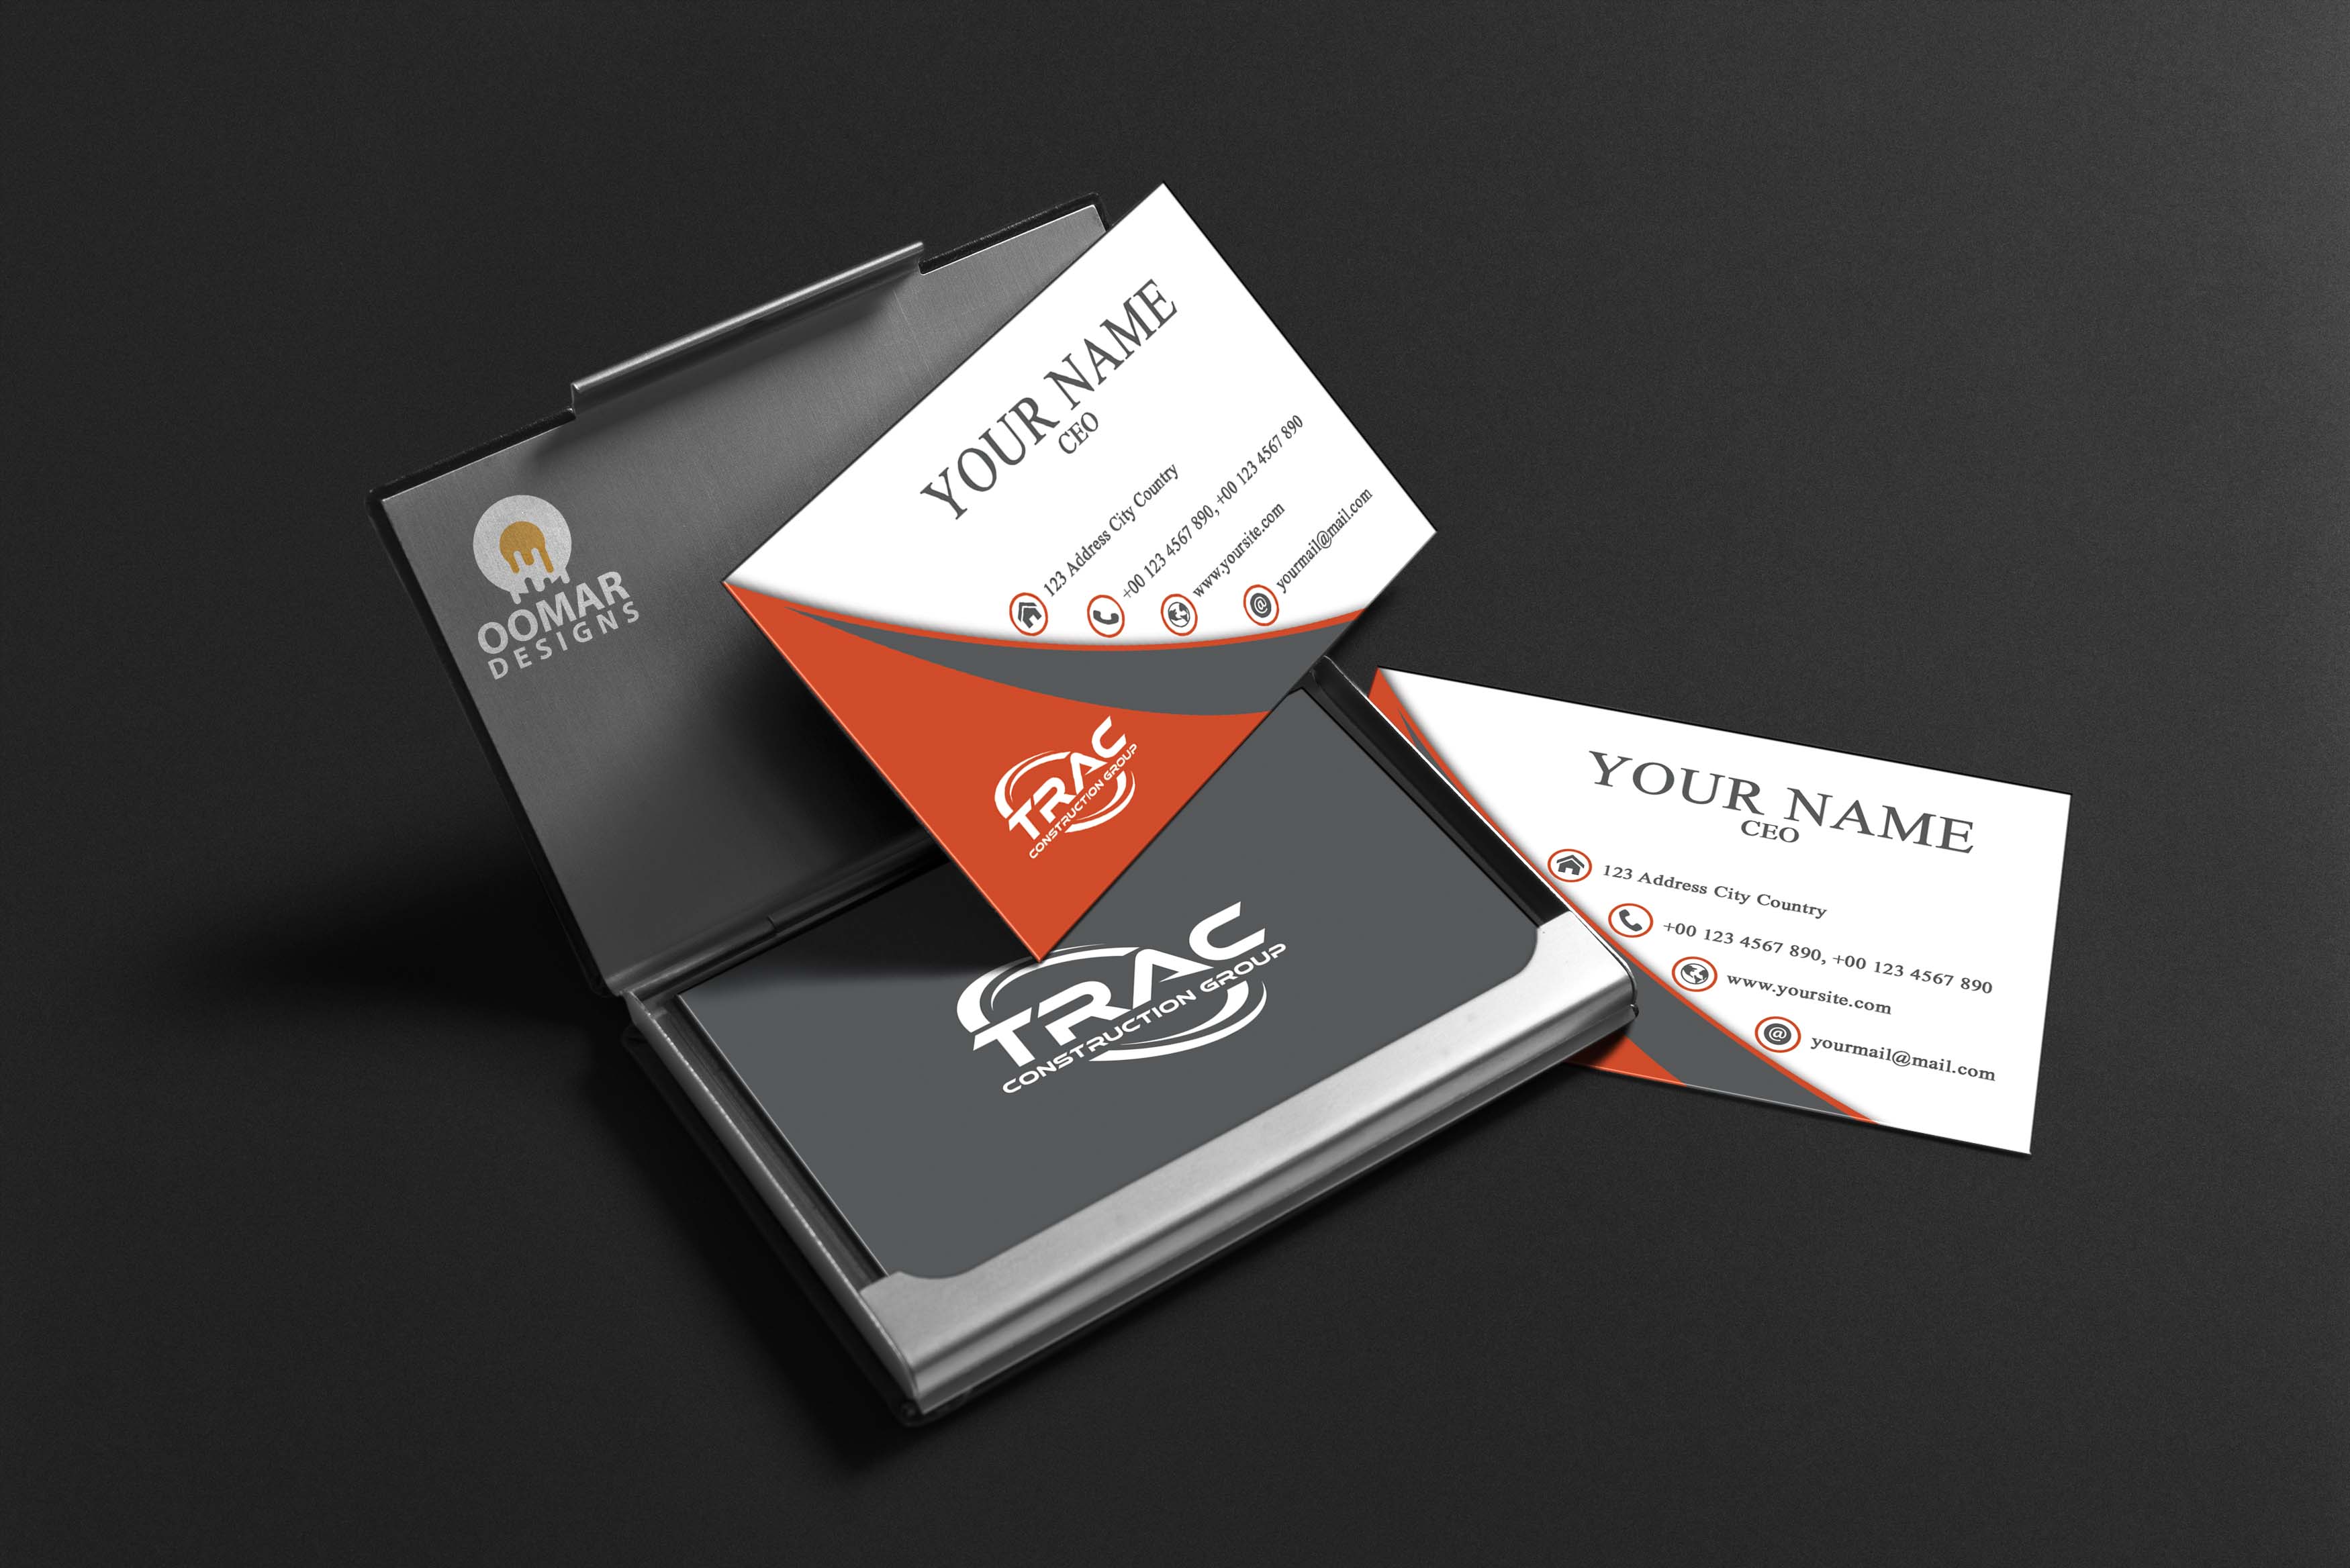 ovrenight prints double sided business cards